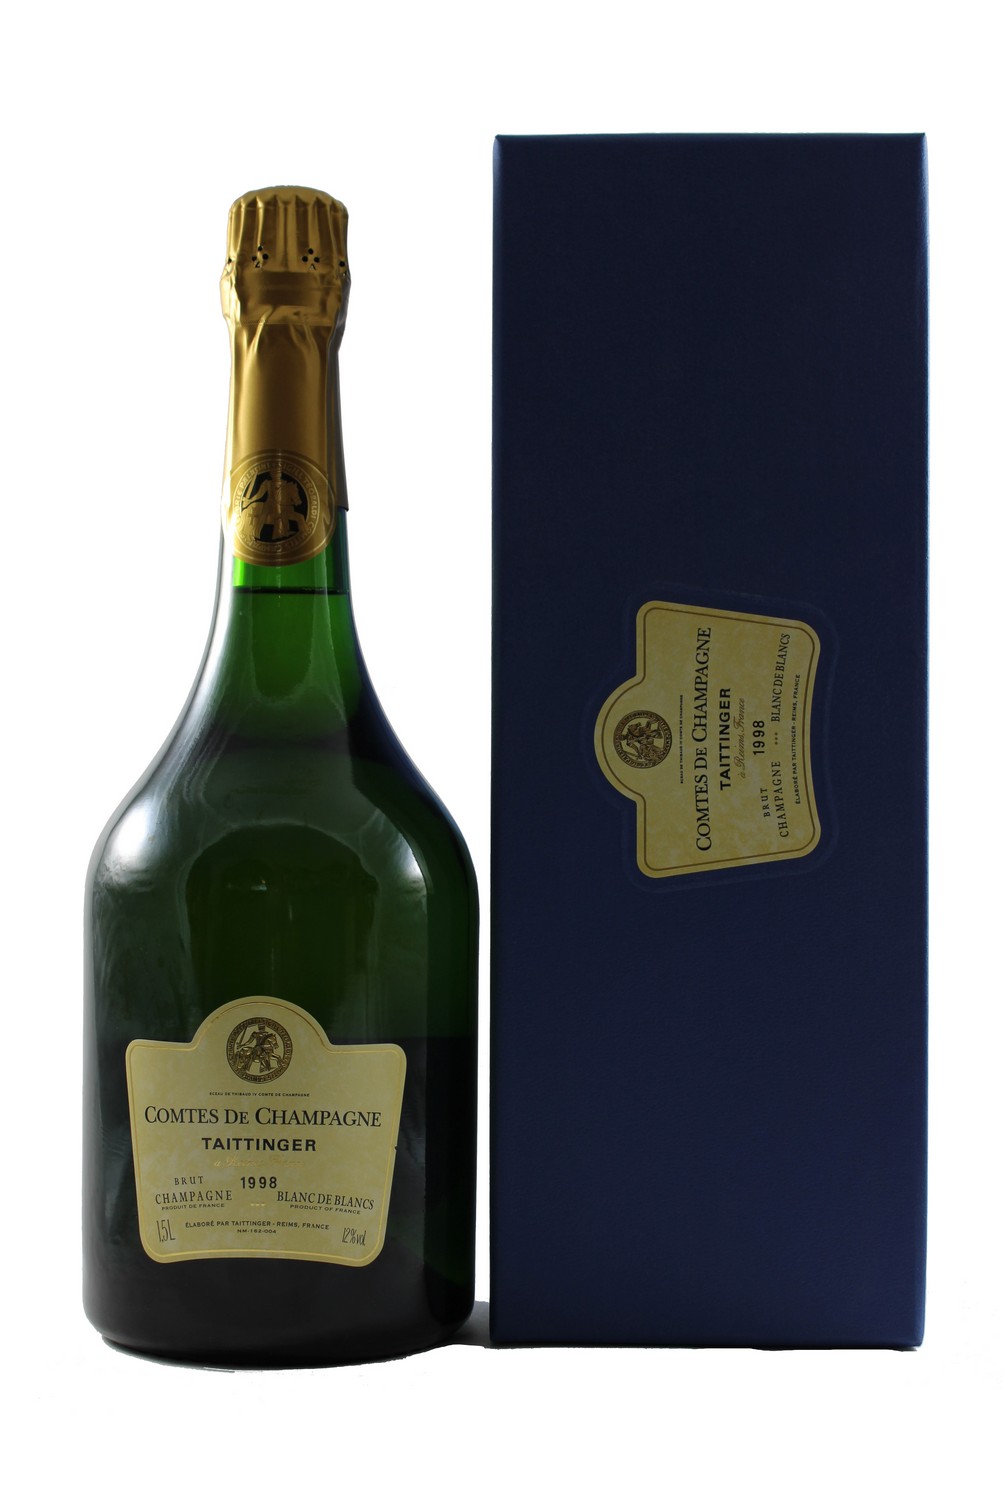 COMTES DE CHAMPAGNE TAITTINGER 1998 150cl – My old cantinetta